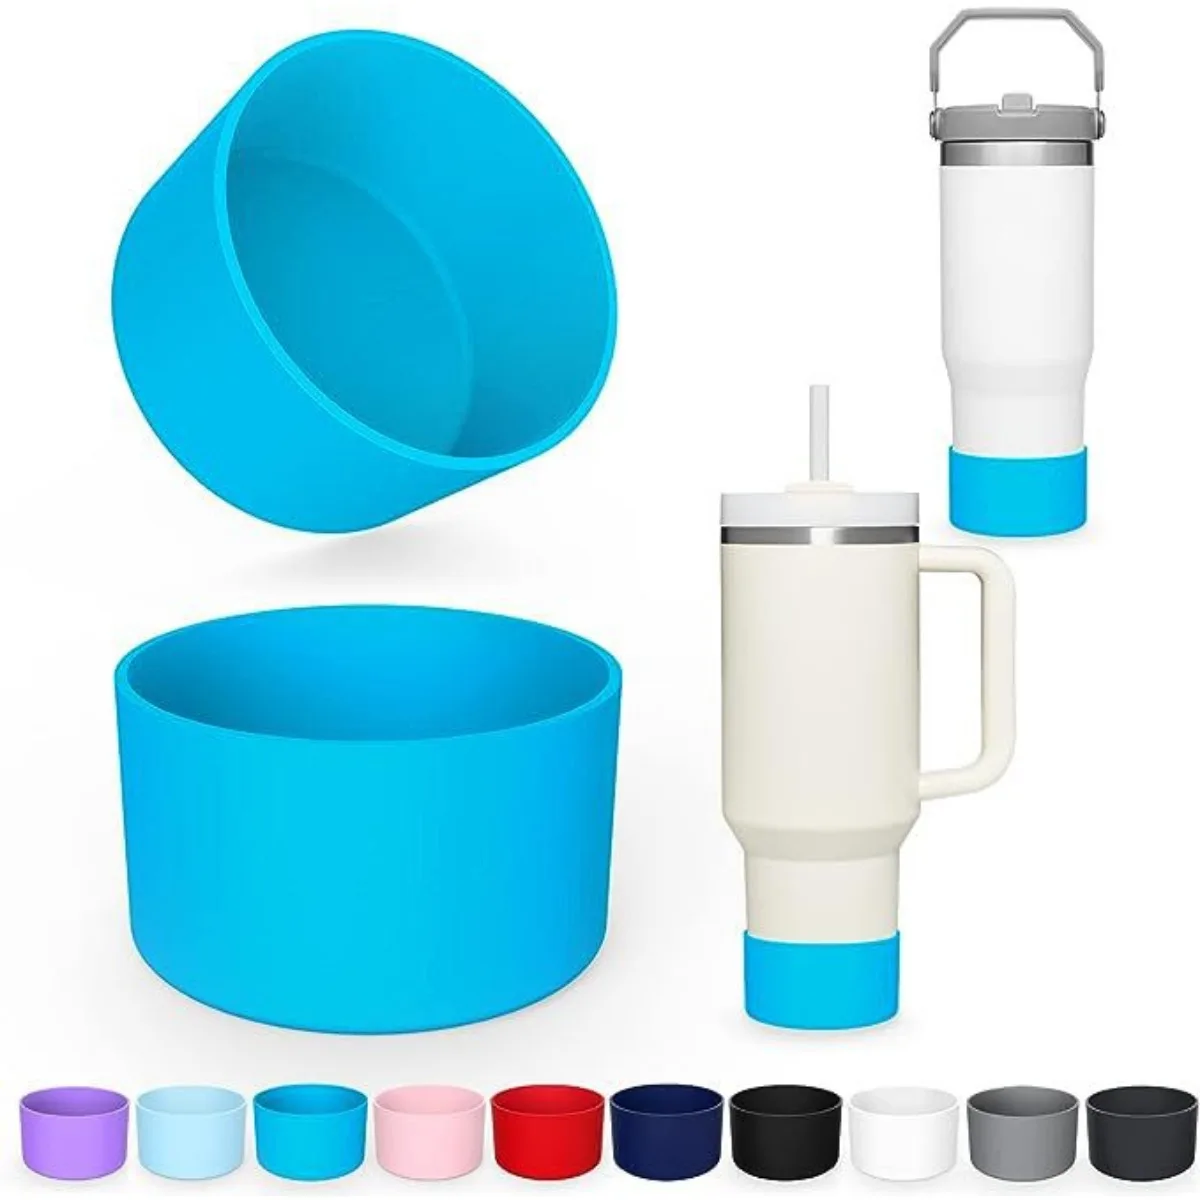 https://ae01.alicdn.com/kf/S184854ea59bf4cf08c0e07c4bb36660e9/7-5cm-9cm-Cup-Cover-Sport-Water-Bottle-Cover-Space-Pot-Silicone-Cover-Rubber-Bottom-Pad.jpg